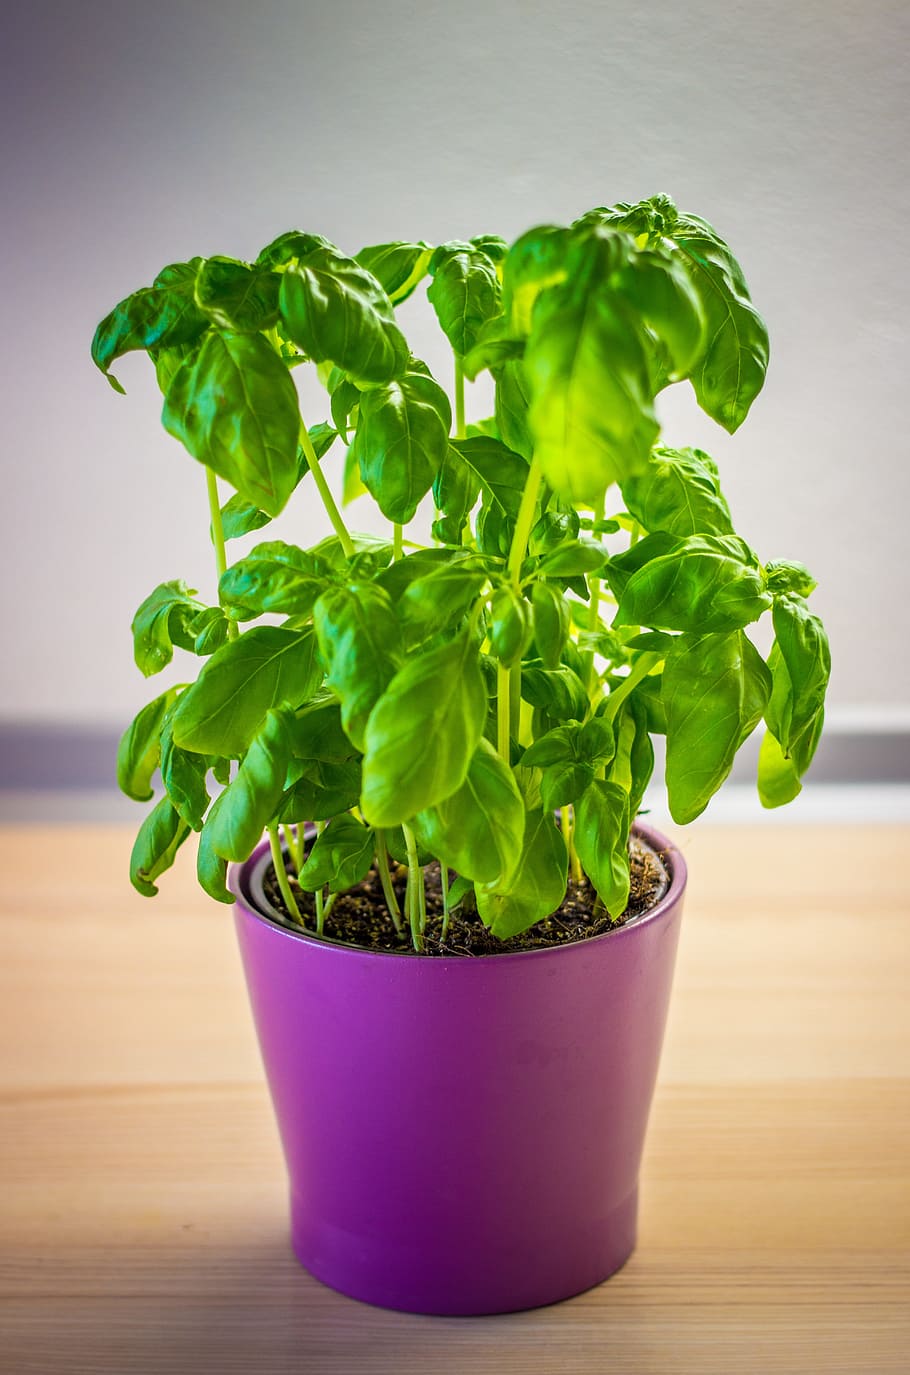 basil, green, herb, herbs, leaf, leaves, plant, green color, plant part, indoors